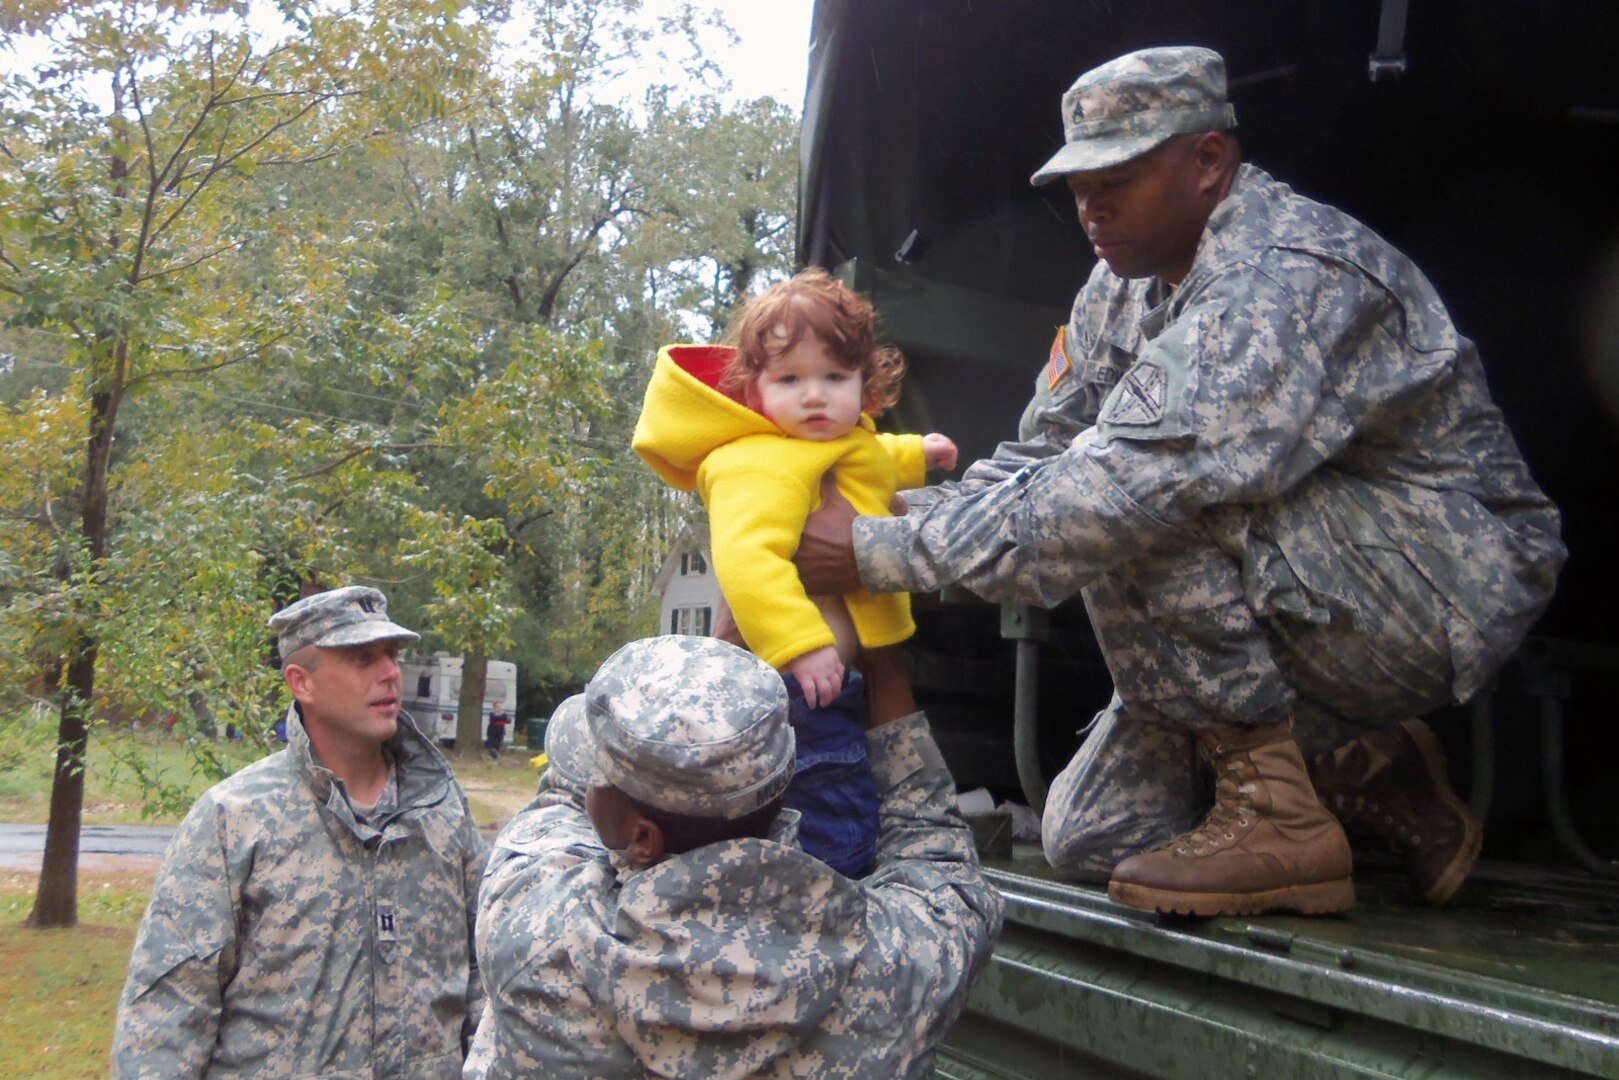 Virginia National Guard members rescued a child and several other flood victims Wednesday.